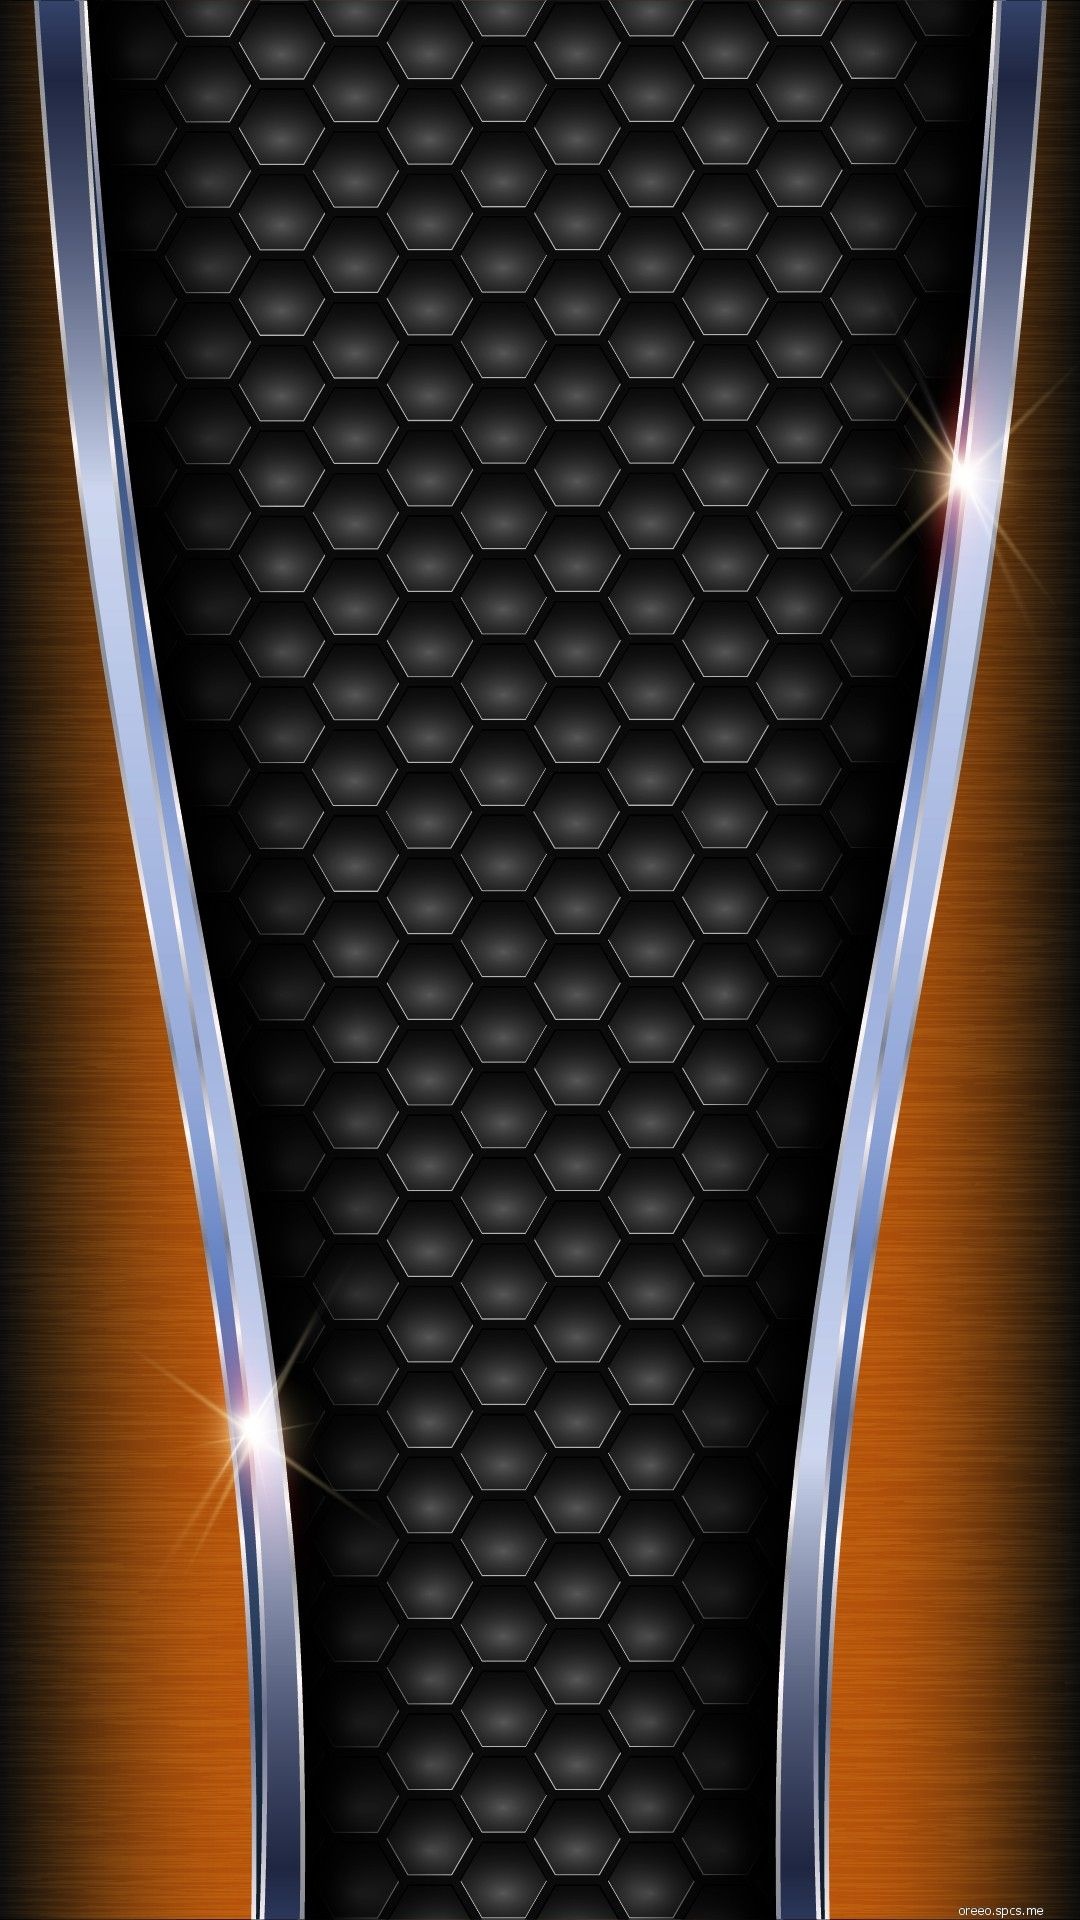 Honeycomb, Chrome-themed wallpapers, Cool designs, Samsung and cellphones, 1080x1920 Full HD Handy